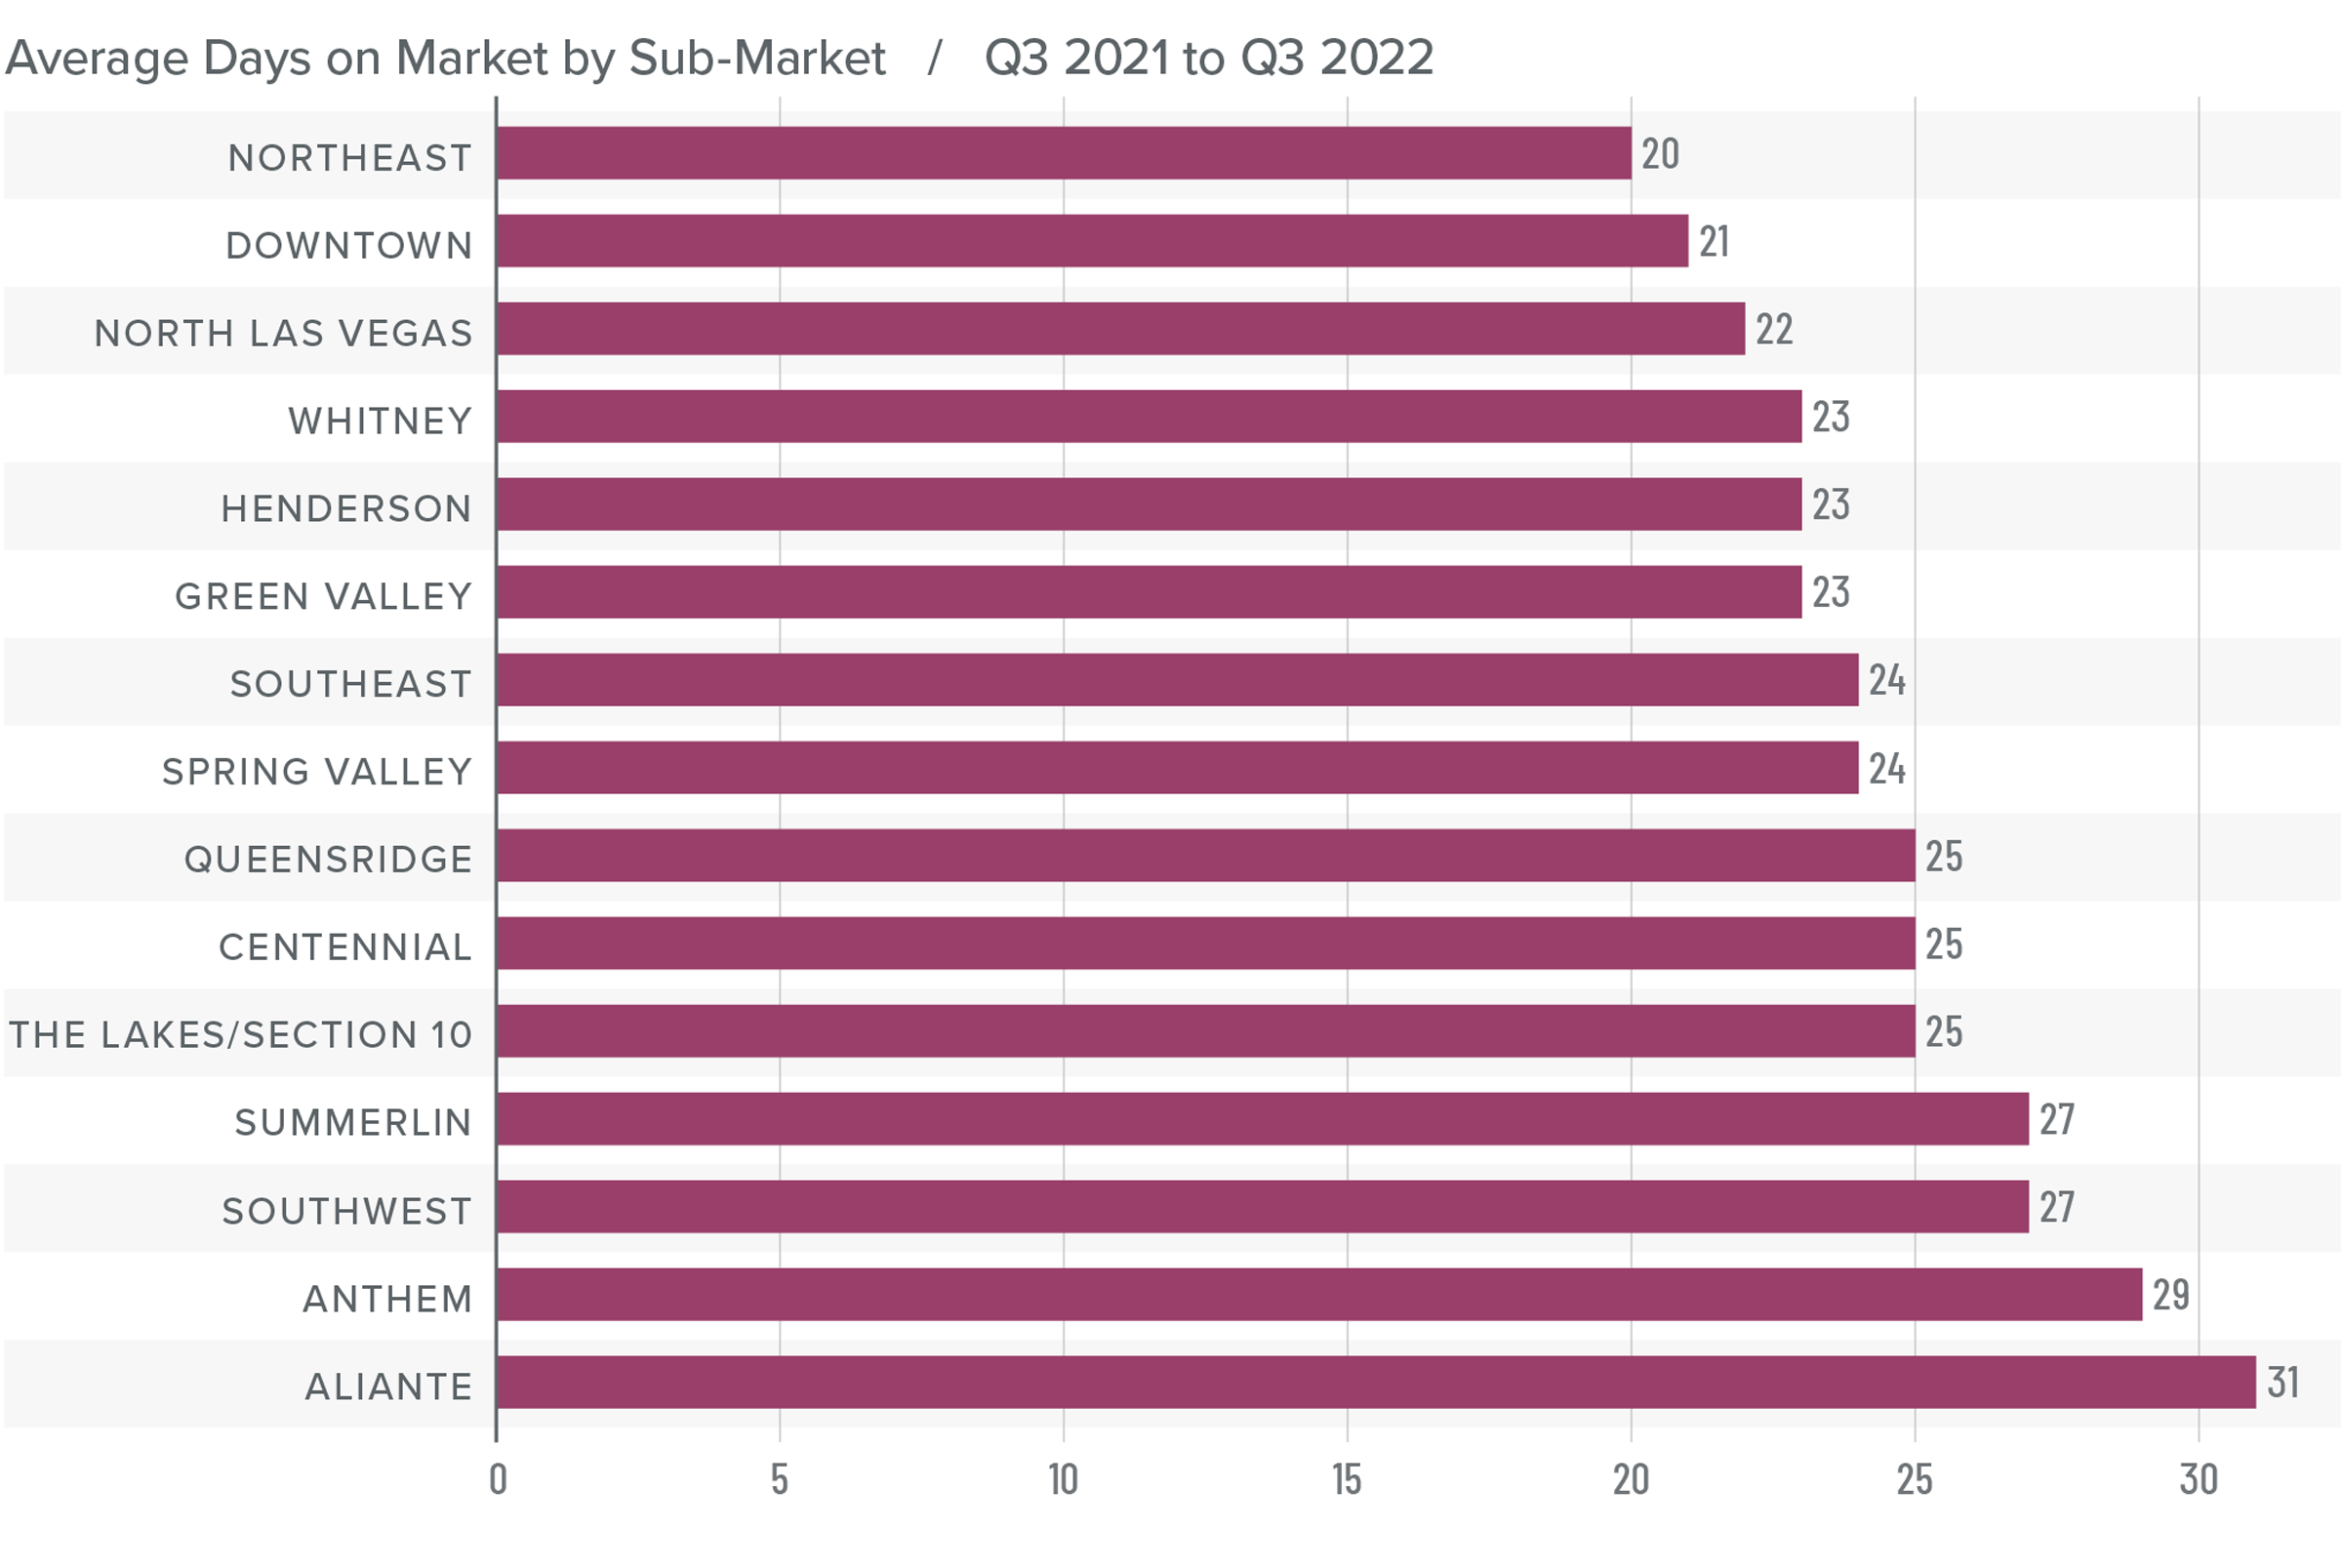 A bar graph showing the average days on market for homes in various sub-market areas of Greater Las Vegas from Q3 2021 to Q3 2022. Northeast the lowest DOM at 20, followed by Downtown at 21, North Las Vegas at 22, Whitney, Henderson, and Green Valley at 23, Southeast, and Spring Valley at 24, Queensridge, Centennial, and The Lakes / Section 10 at 25, Summerlin and Southwest at 27, Anthem at 29, and Aliante at 31.